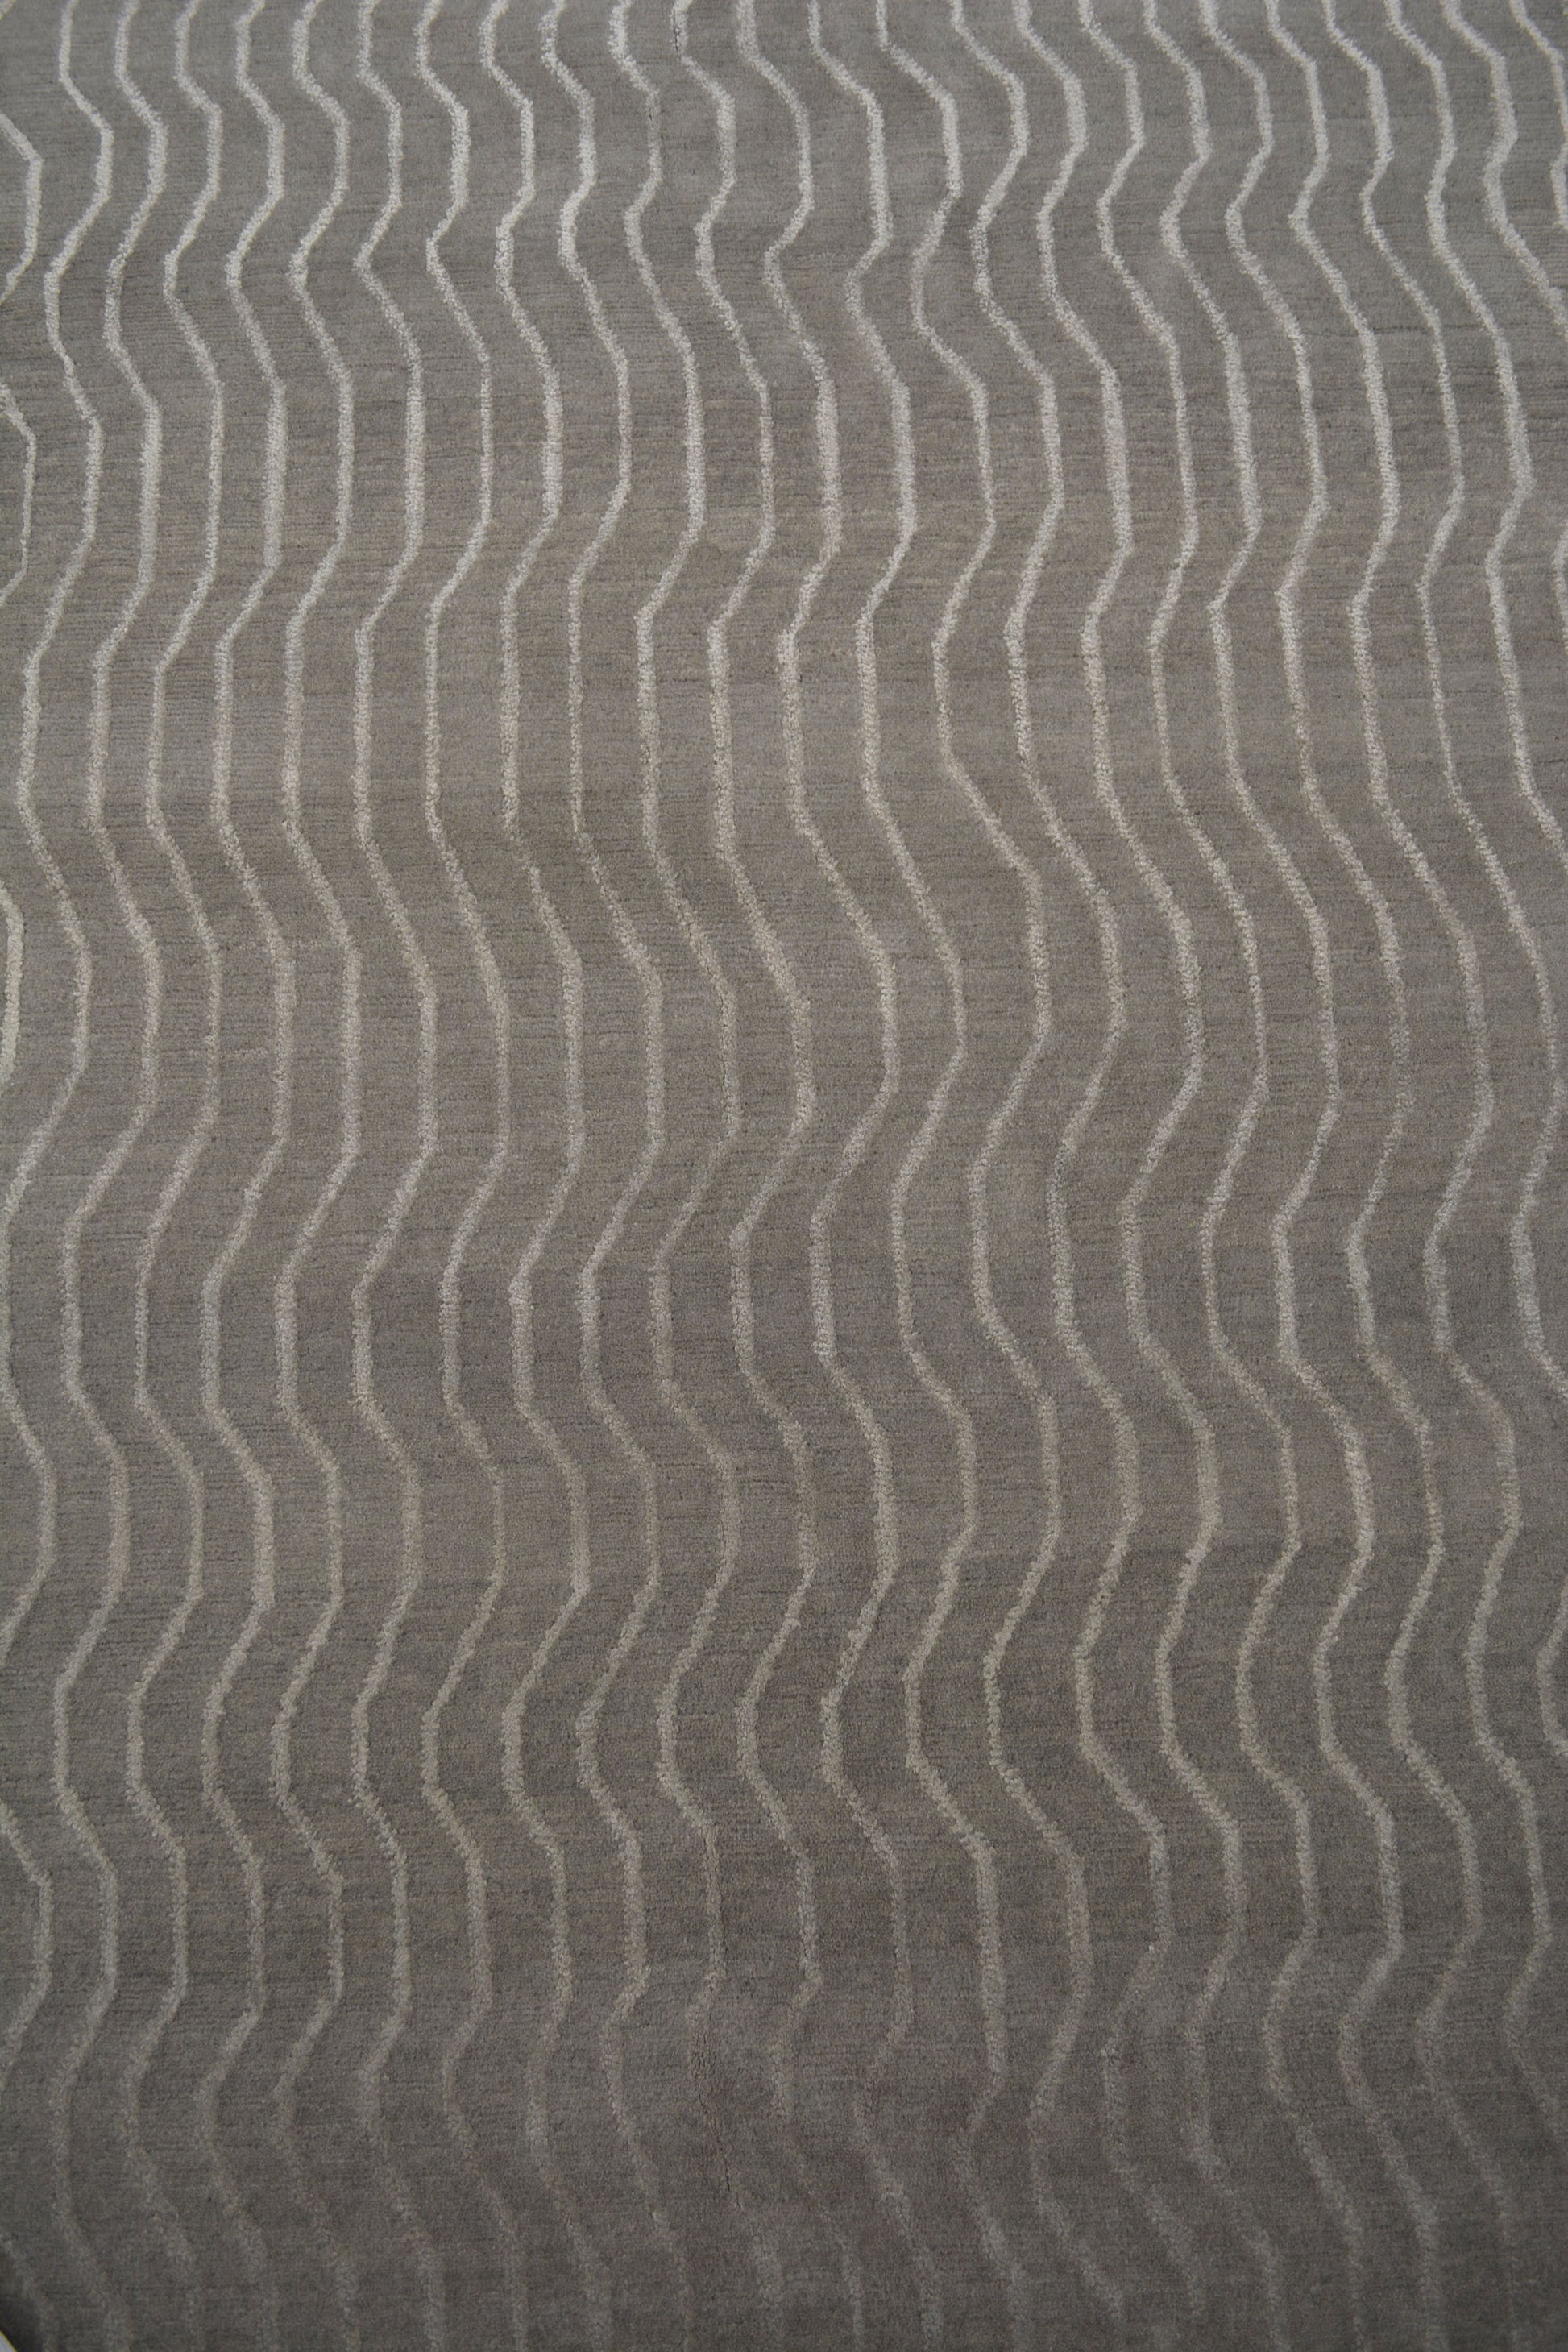 The center's close-up shows that every wave line has the same separation from each other. 